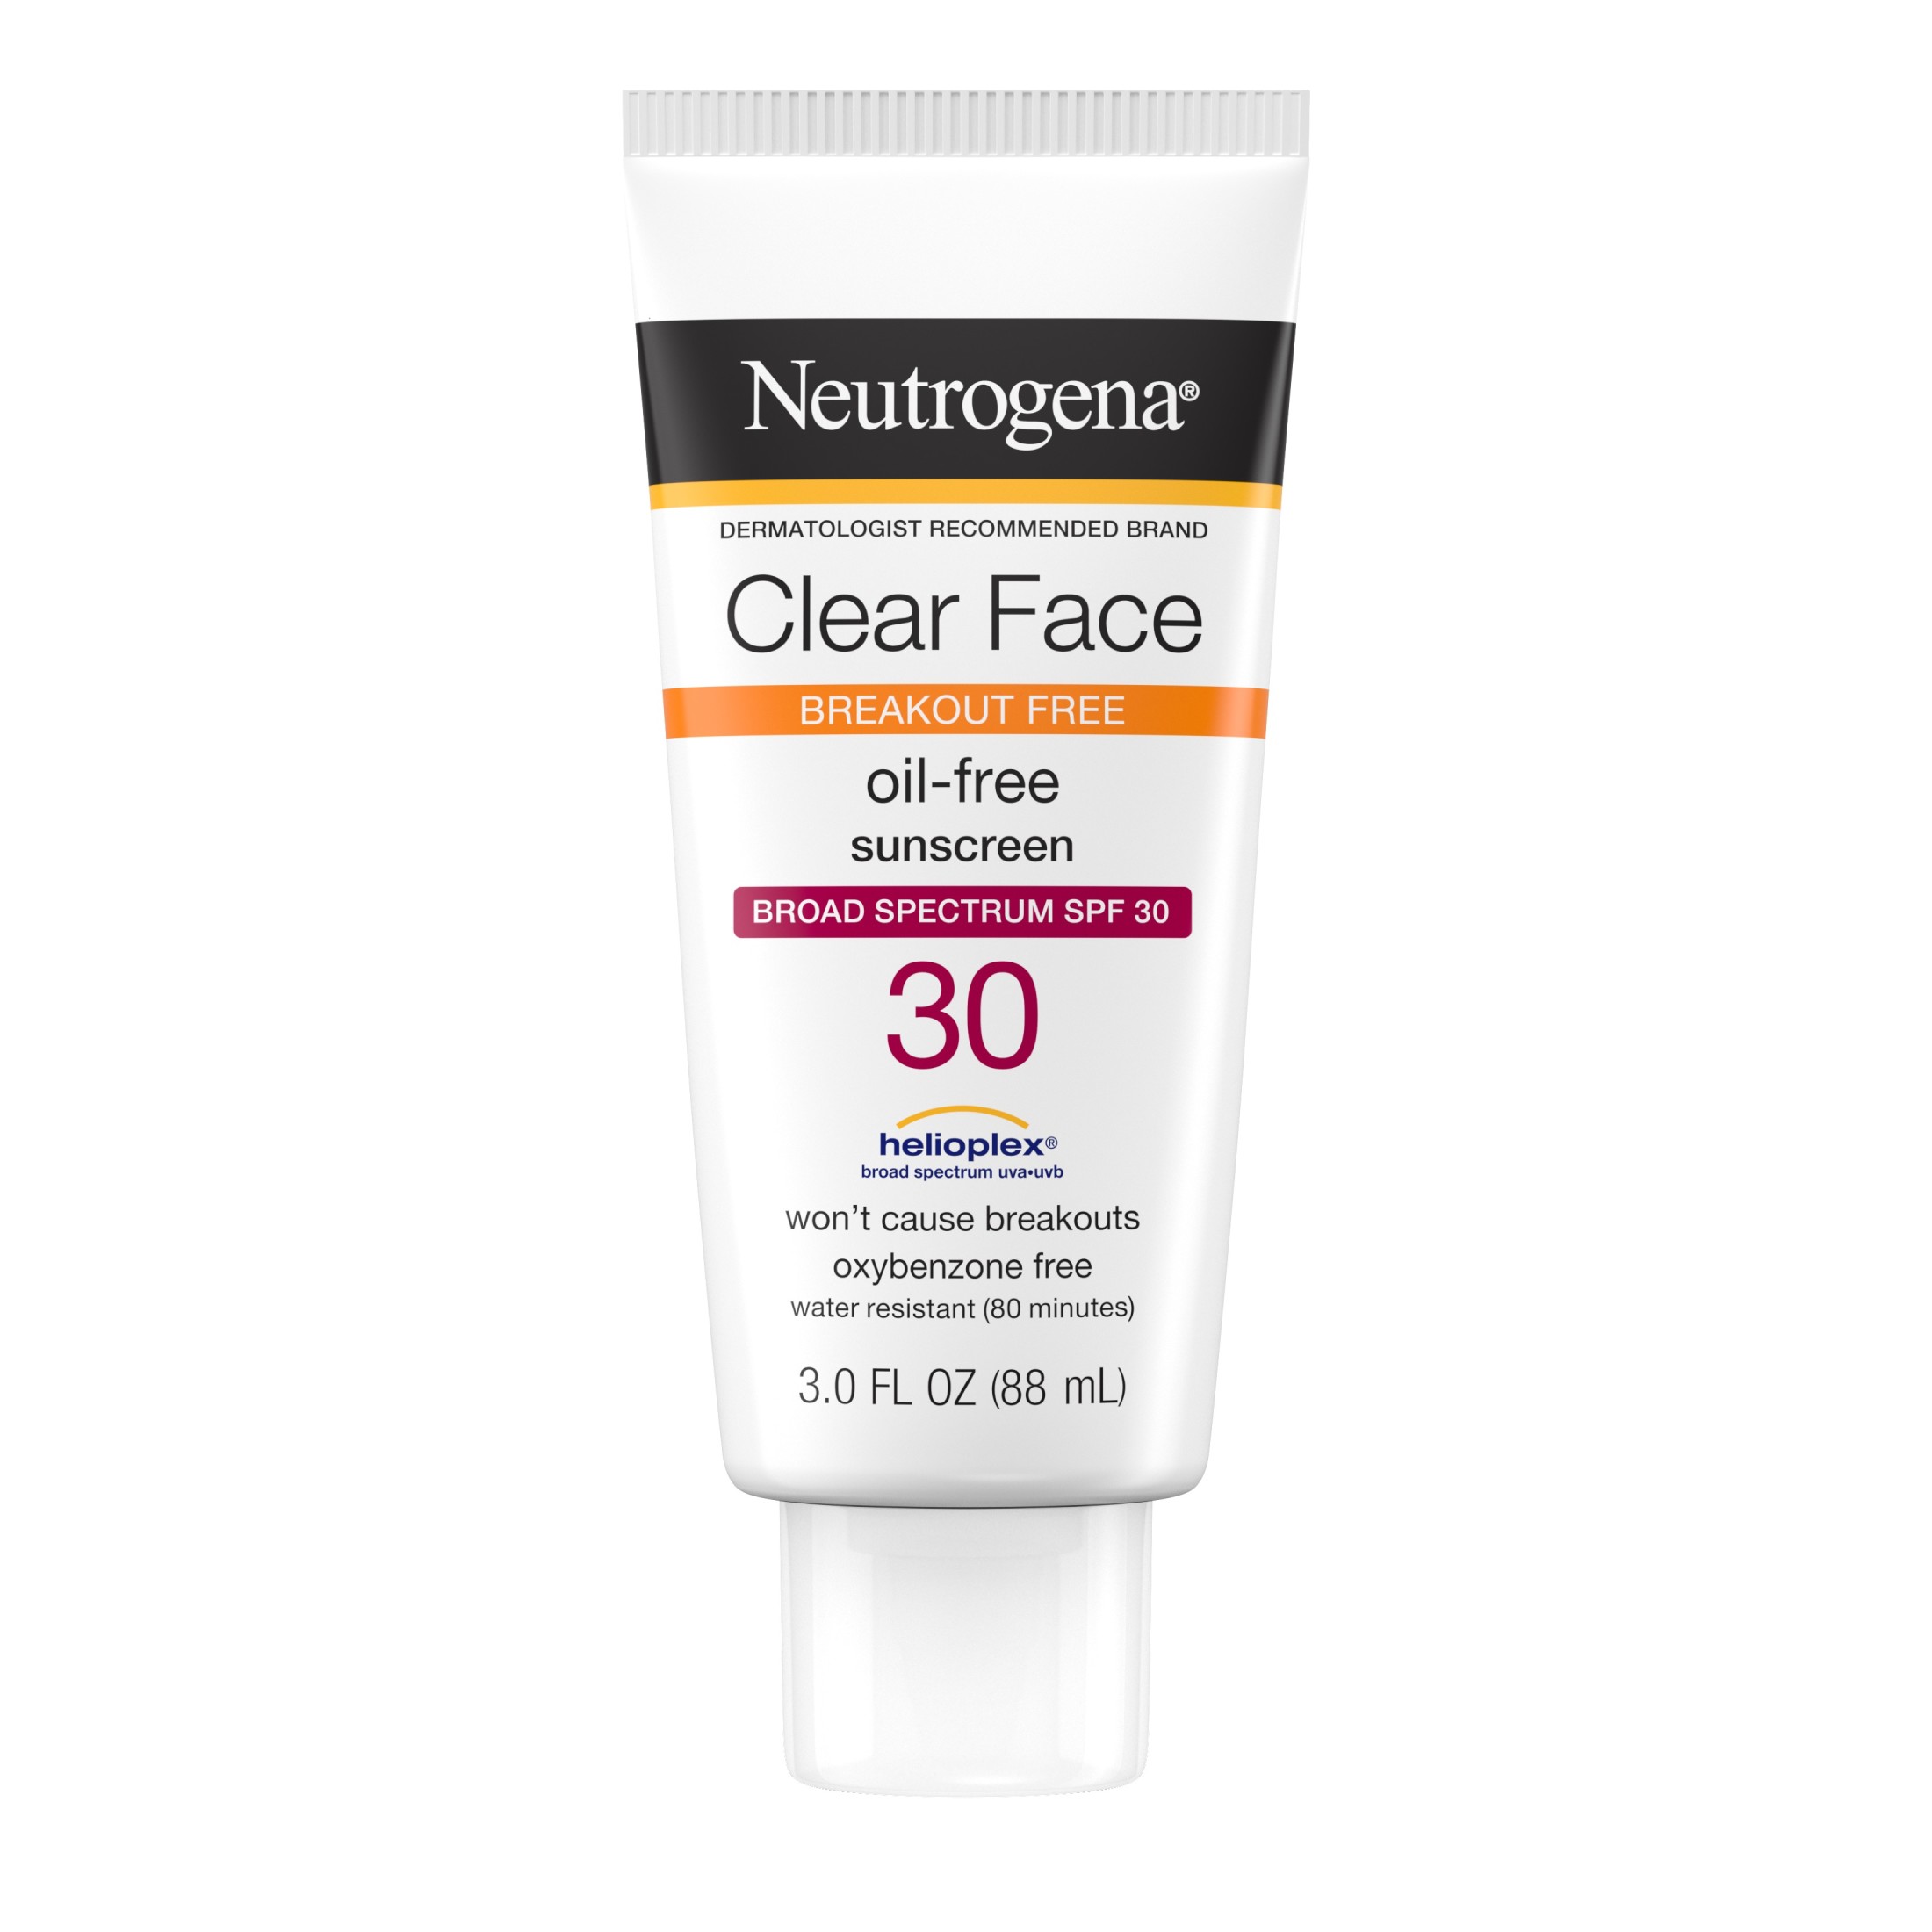 Neutrogena Clear Face Liquid Lotion Sunscreen with SPF 30, 3 fl. oz - image 1 of 16